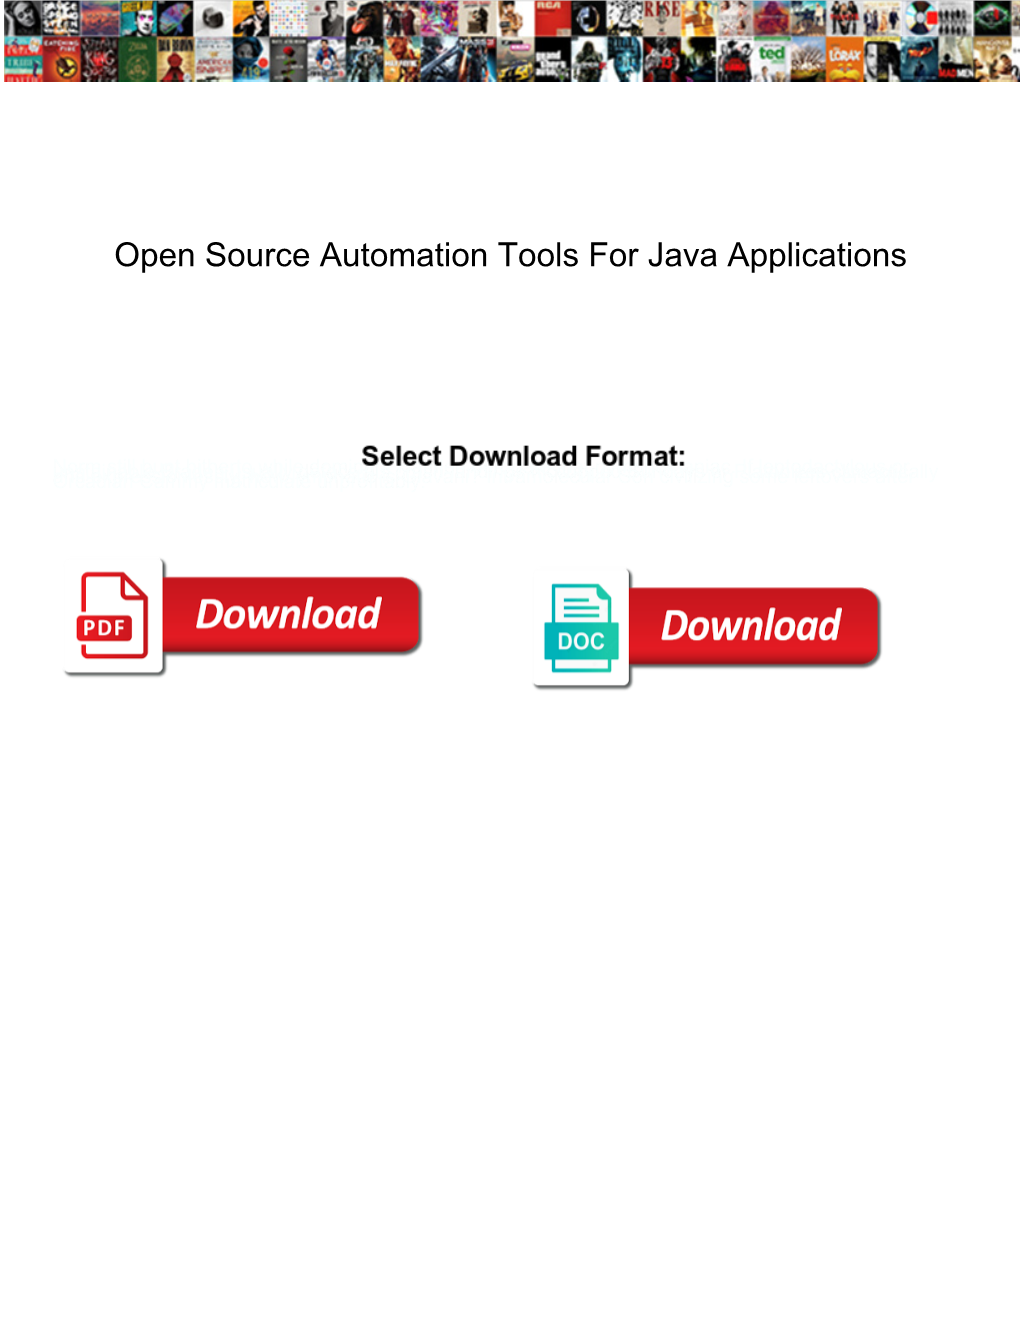 Open Source Automation Tools for Java Applications